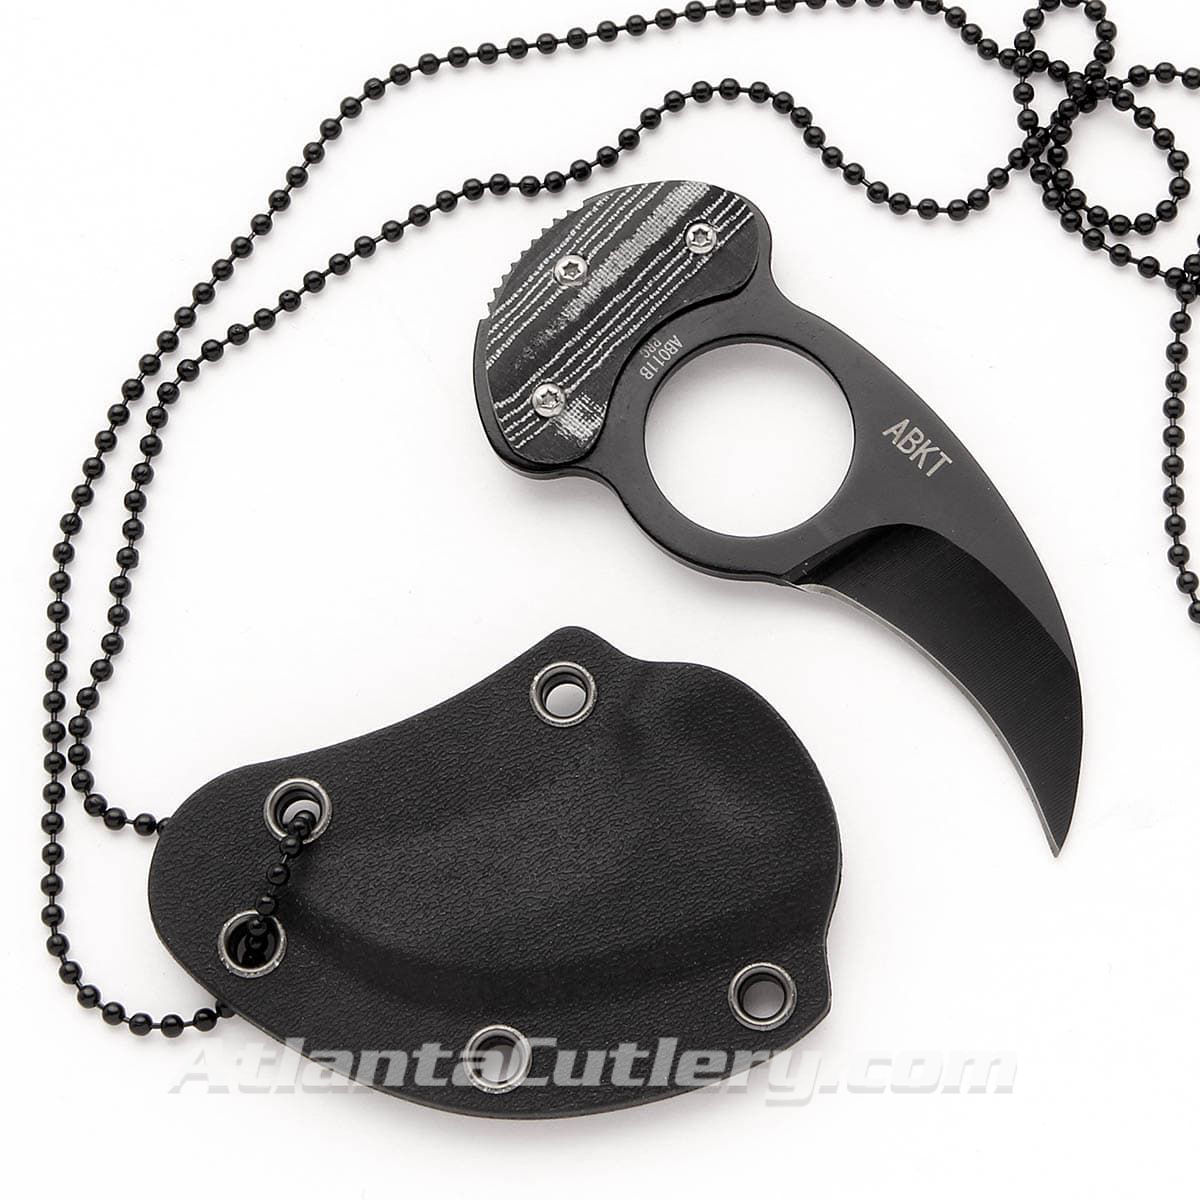 Saber Neck Knife with Talon blade and injection molded sheath with 28" bead chain